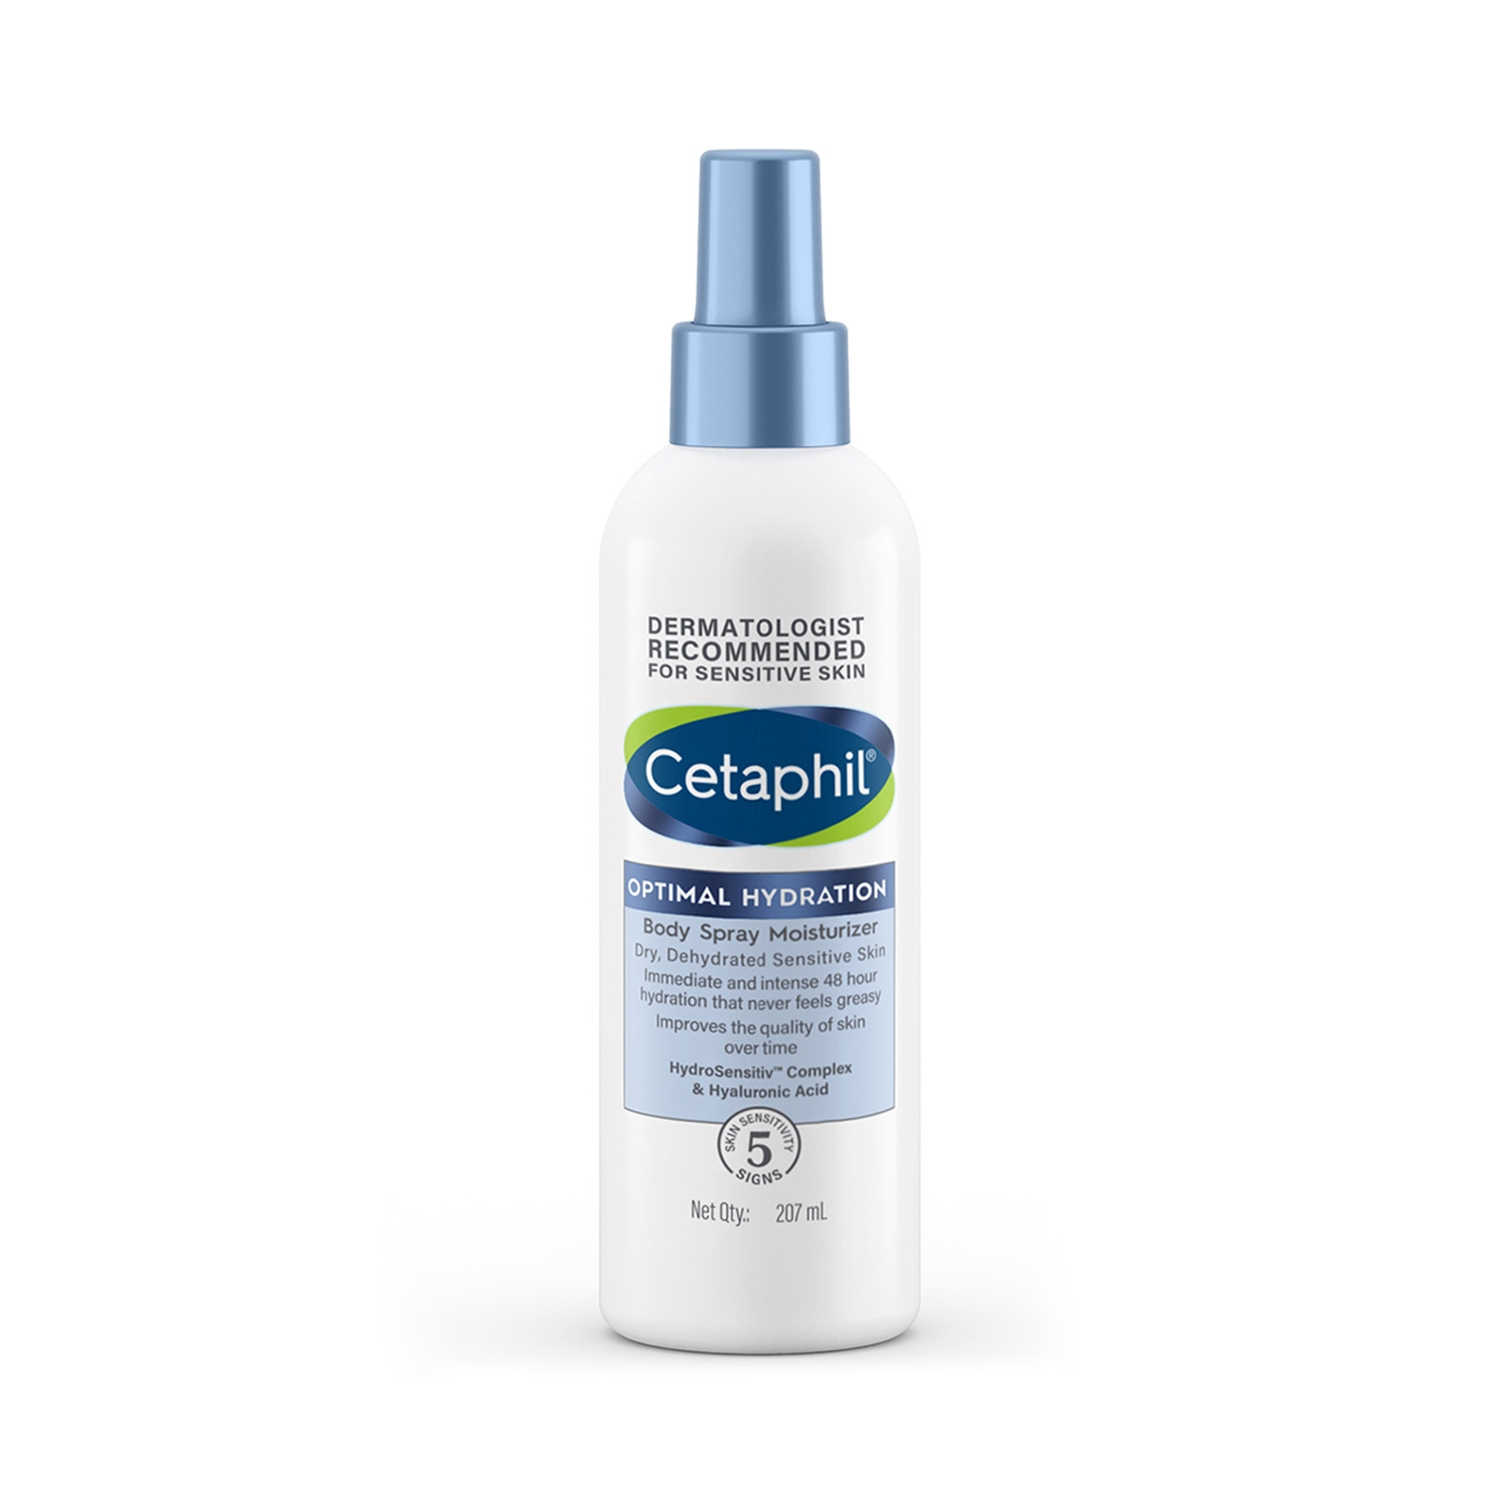 Cetaphil | Cetaphil Optimal Hydration Body Spray Moisturizer with Hyaluronic Acid + Vitamin E For Dehydrated Skin (207ml)